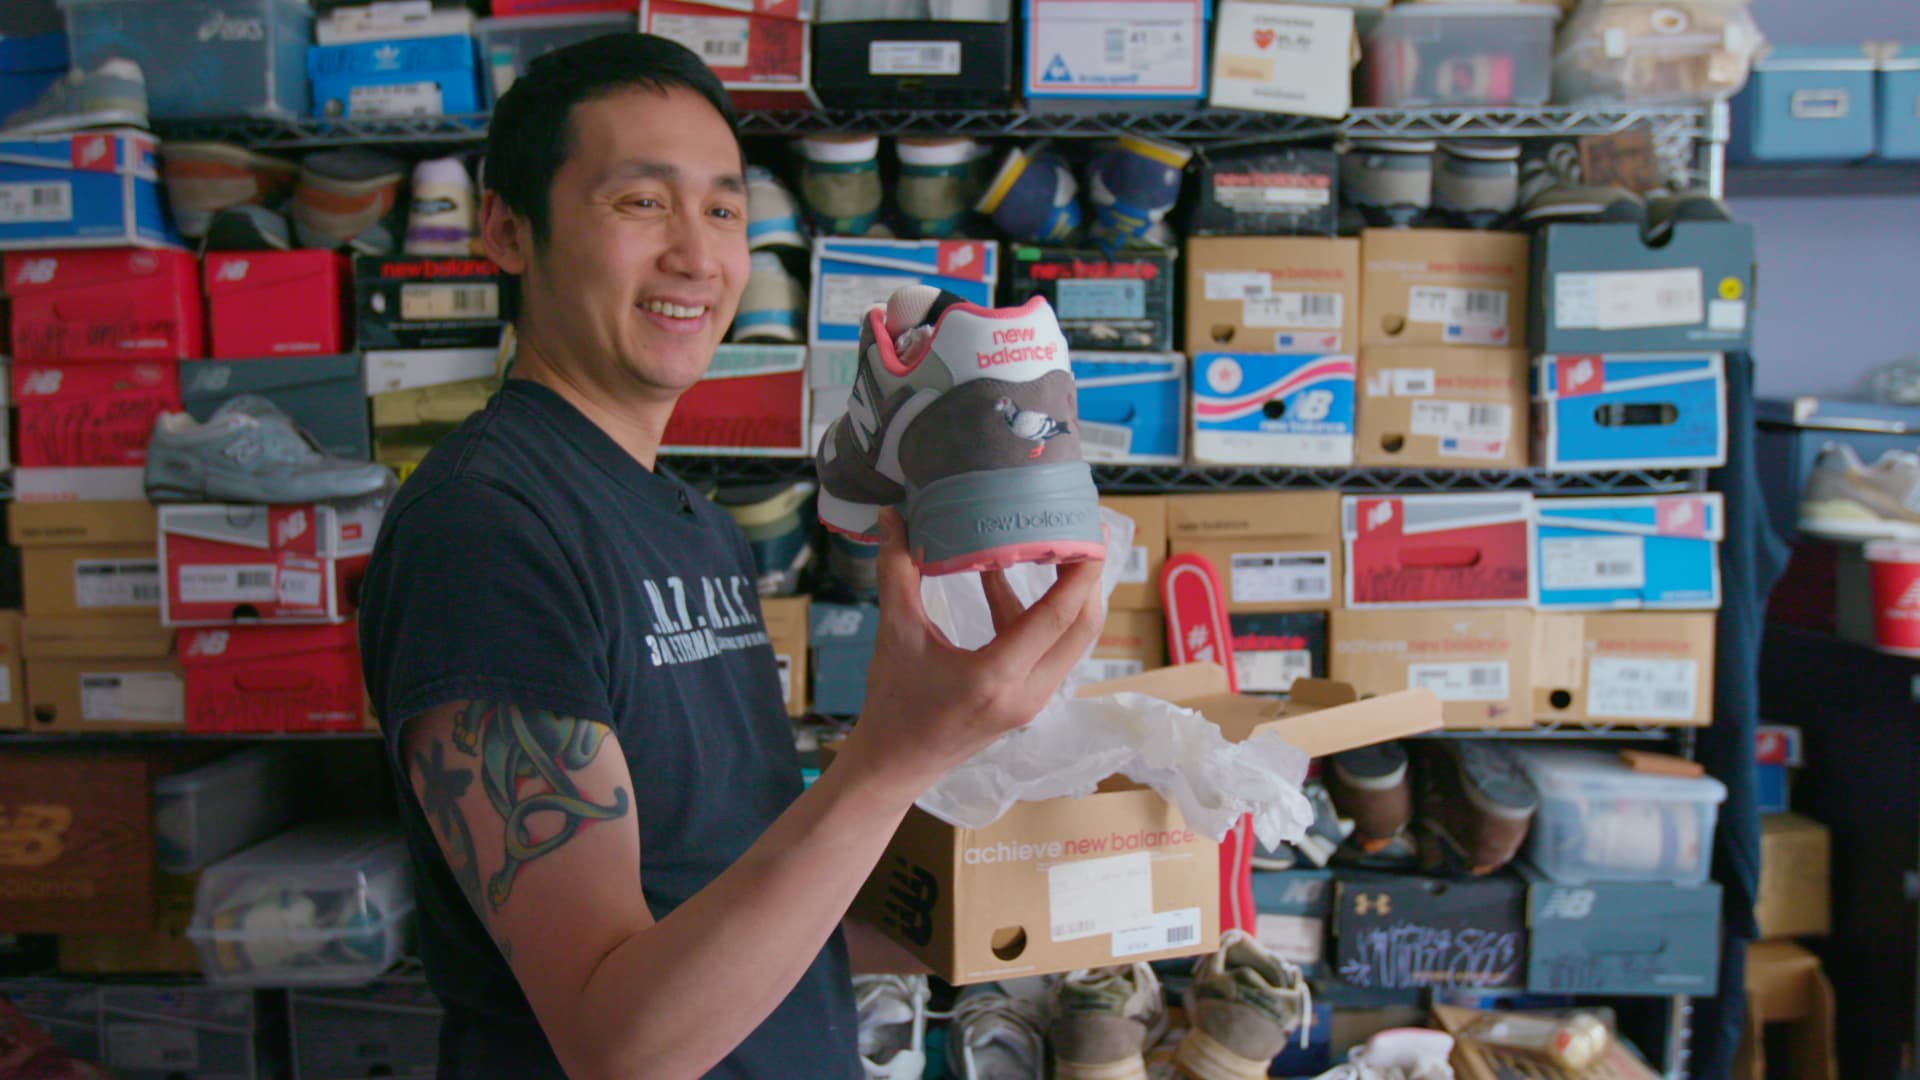 Richie Roxas purchased his first pair of New Balance sneakers in 1994. He's been collecting the brand's shoes and memorabilia ever since.